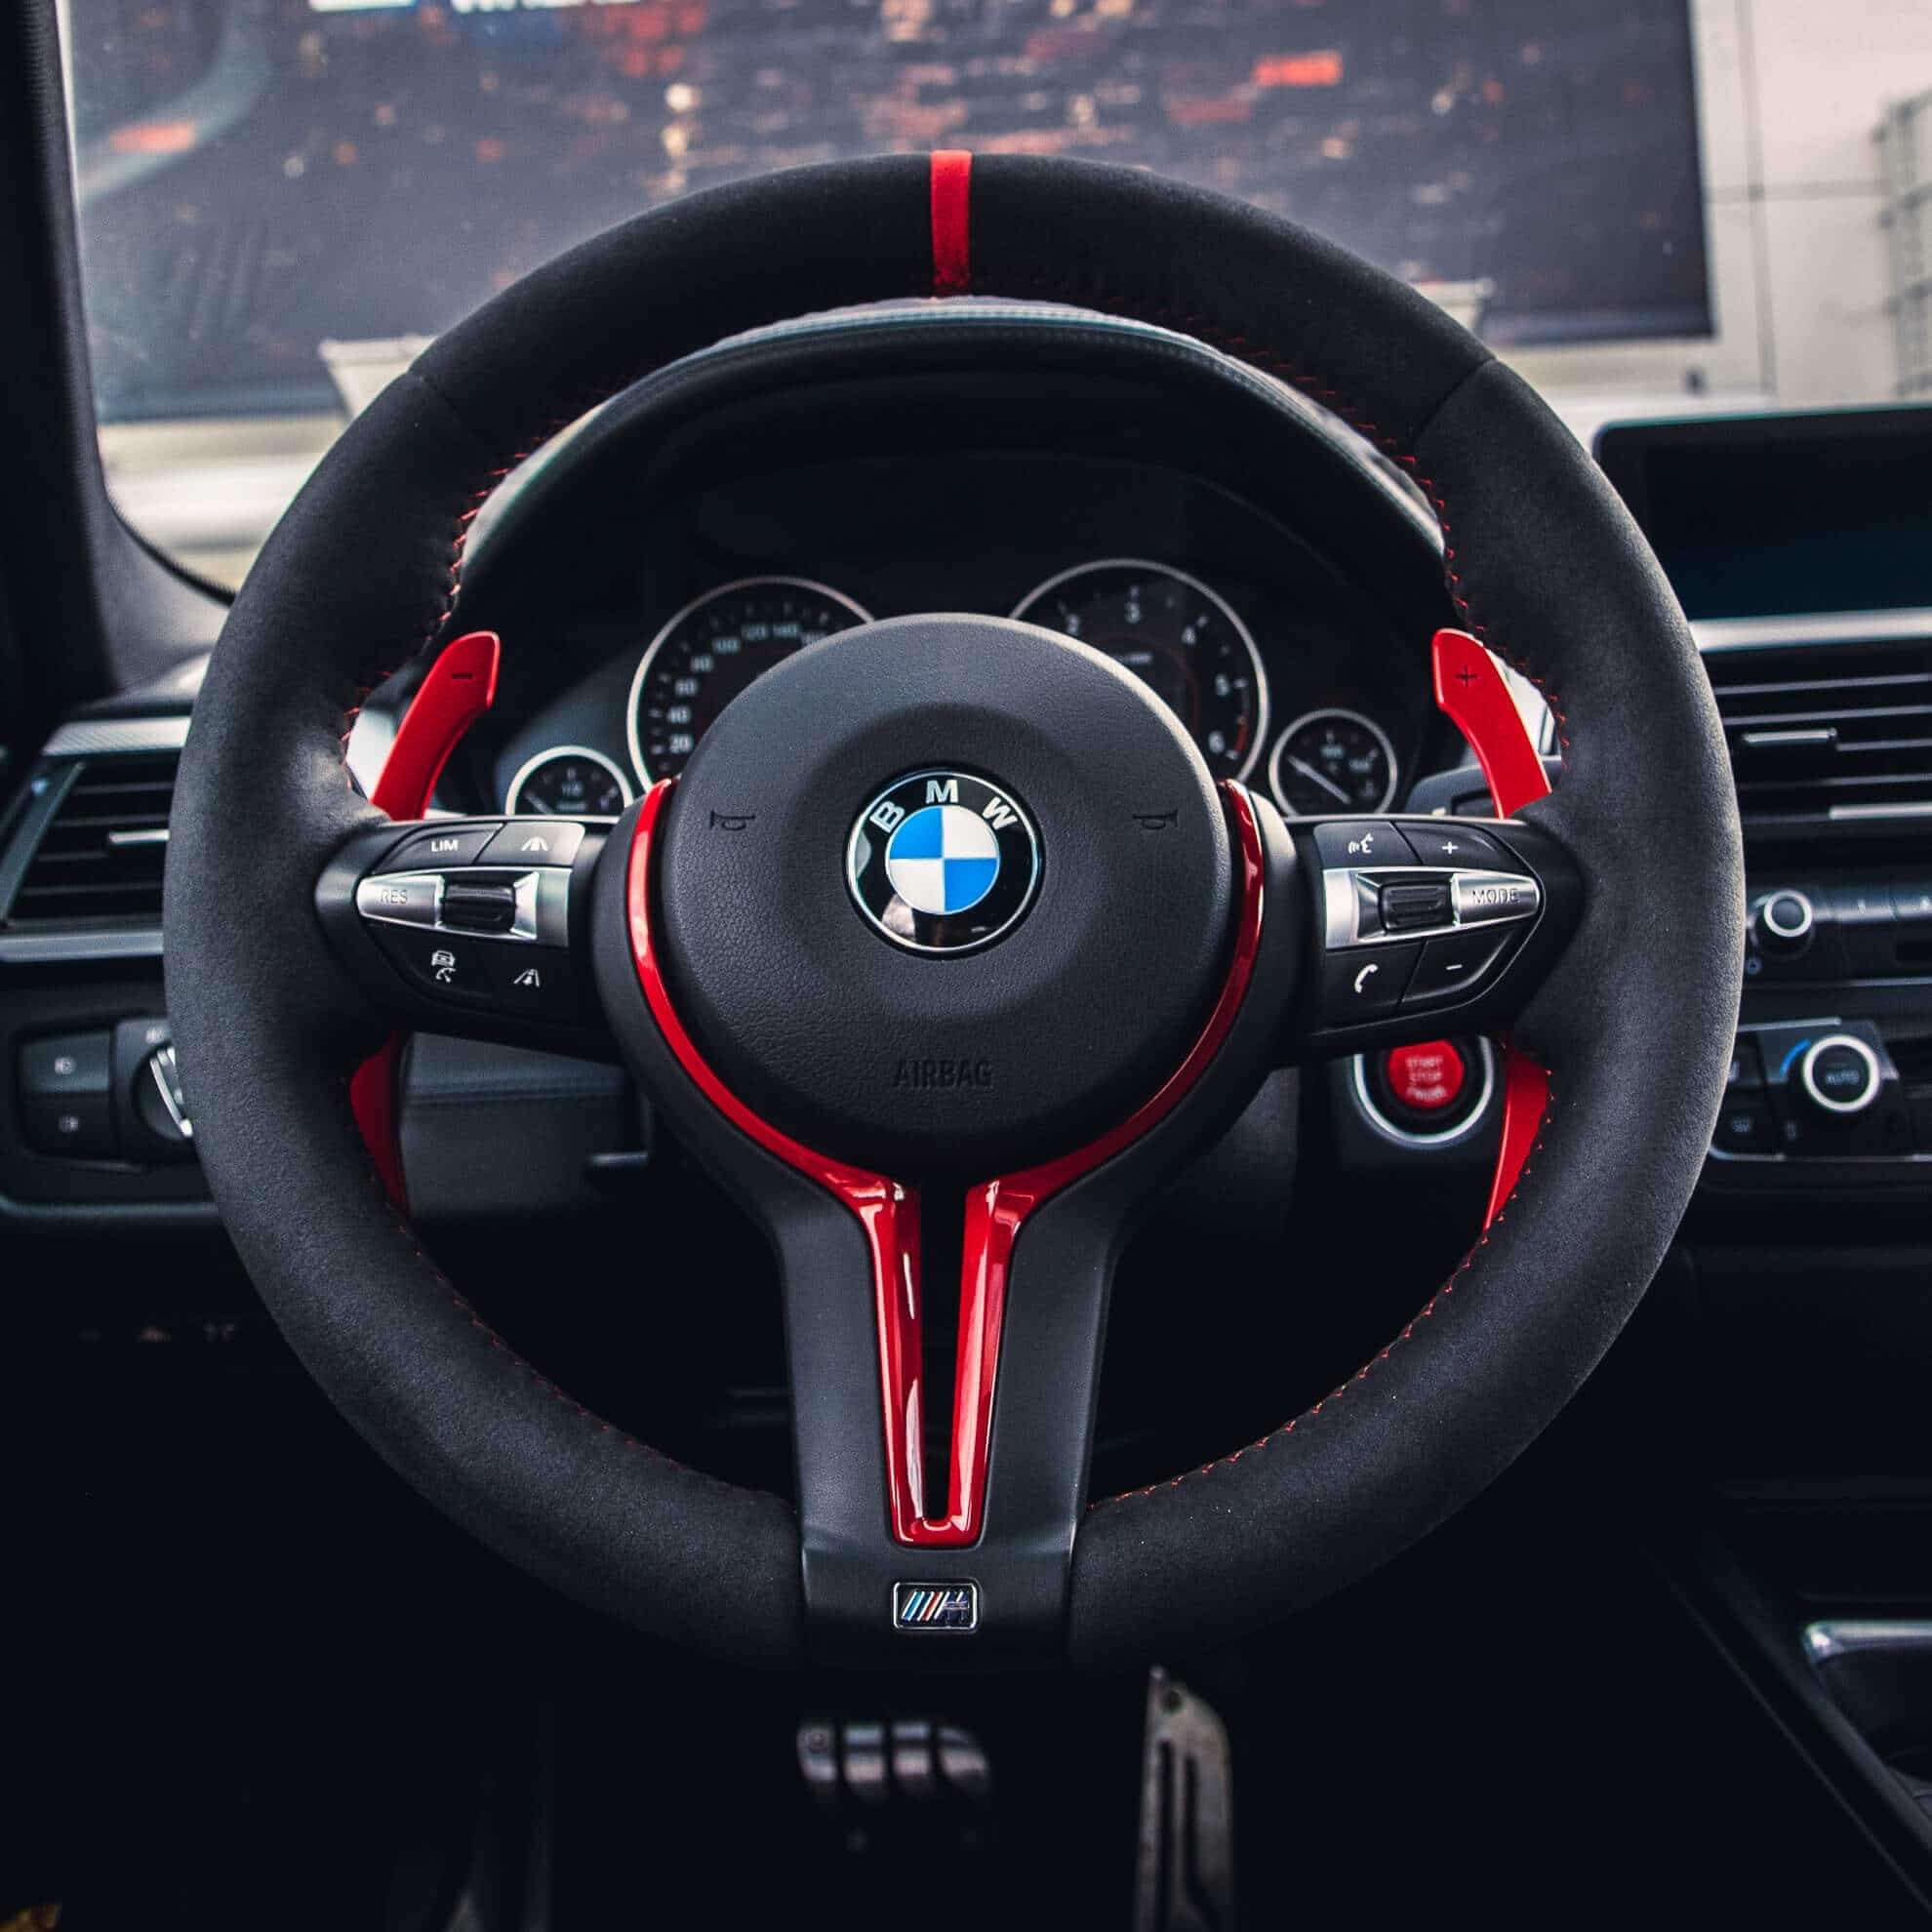 https://aulitzkyexhaust.de/media/cf/8e/22/1621322018/PaddleShifterz-BMW-F90-Compeition-carbon-fiber-paddle-shifters-red-2.jpg